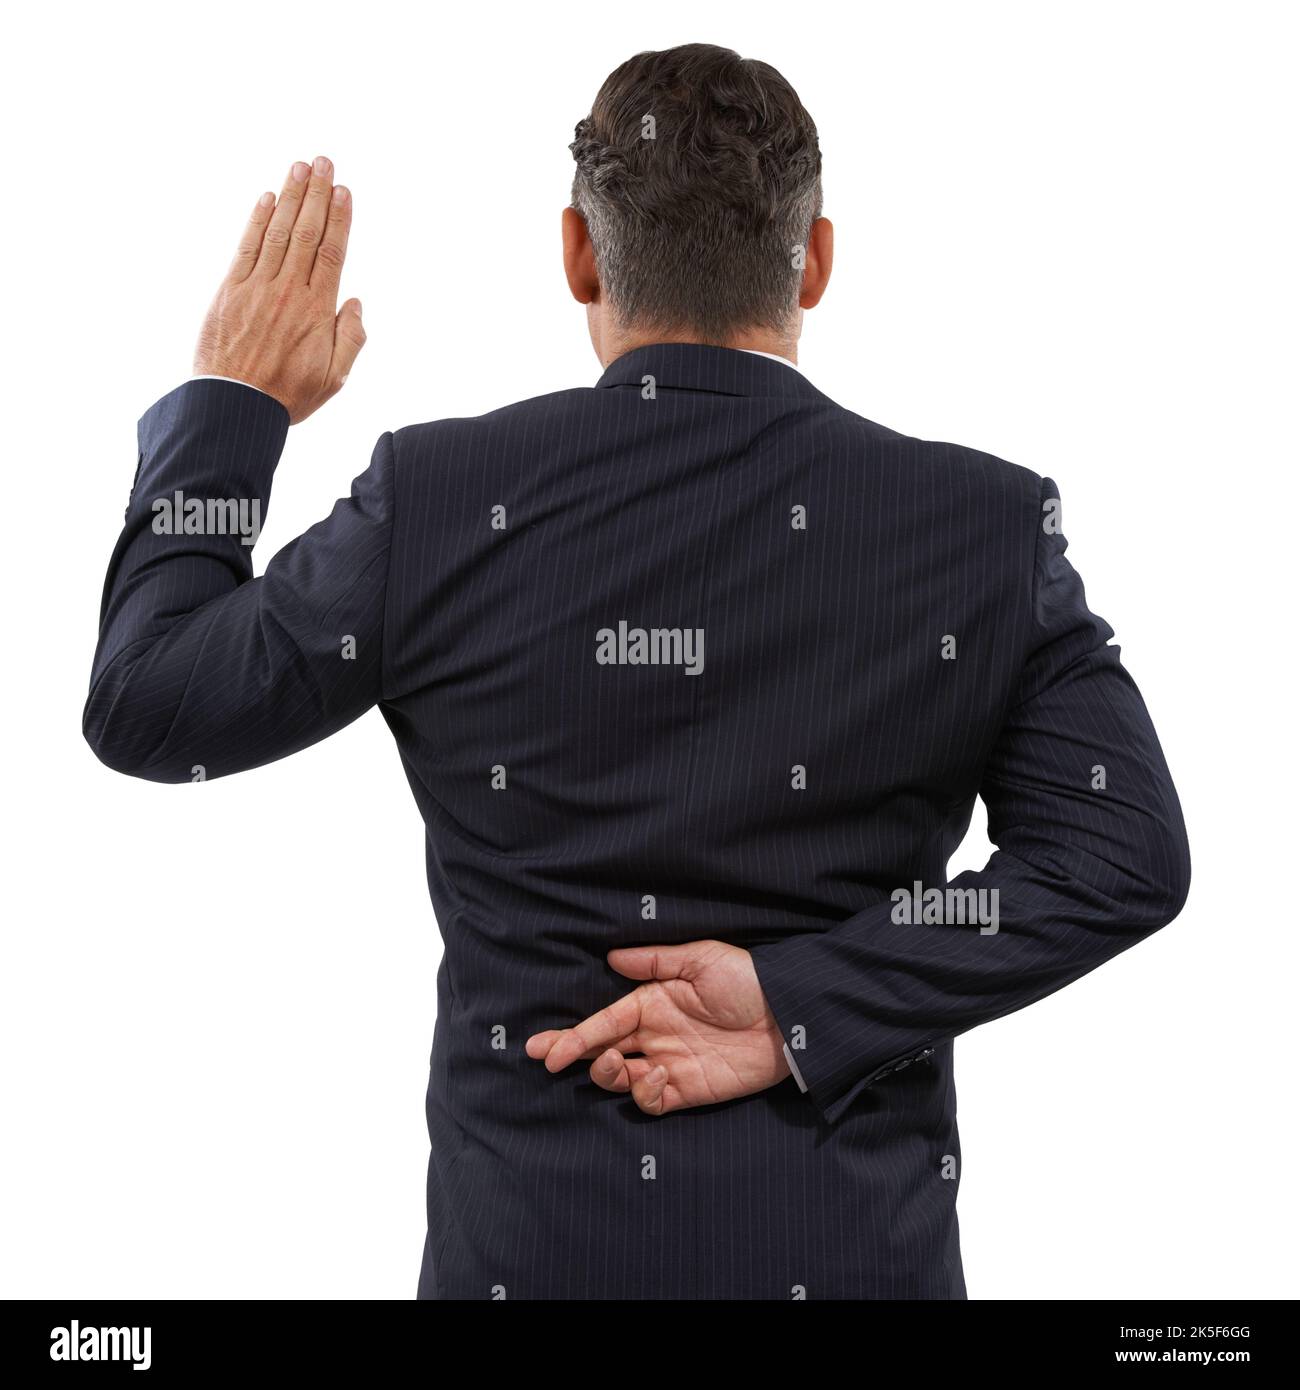 Dishonest oath. Rearview of a mature man swearing an oath with his fingers crossed behind his back. Stock Photo